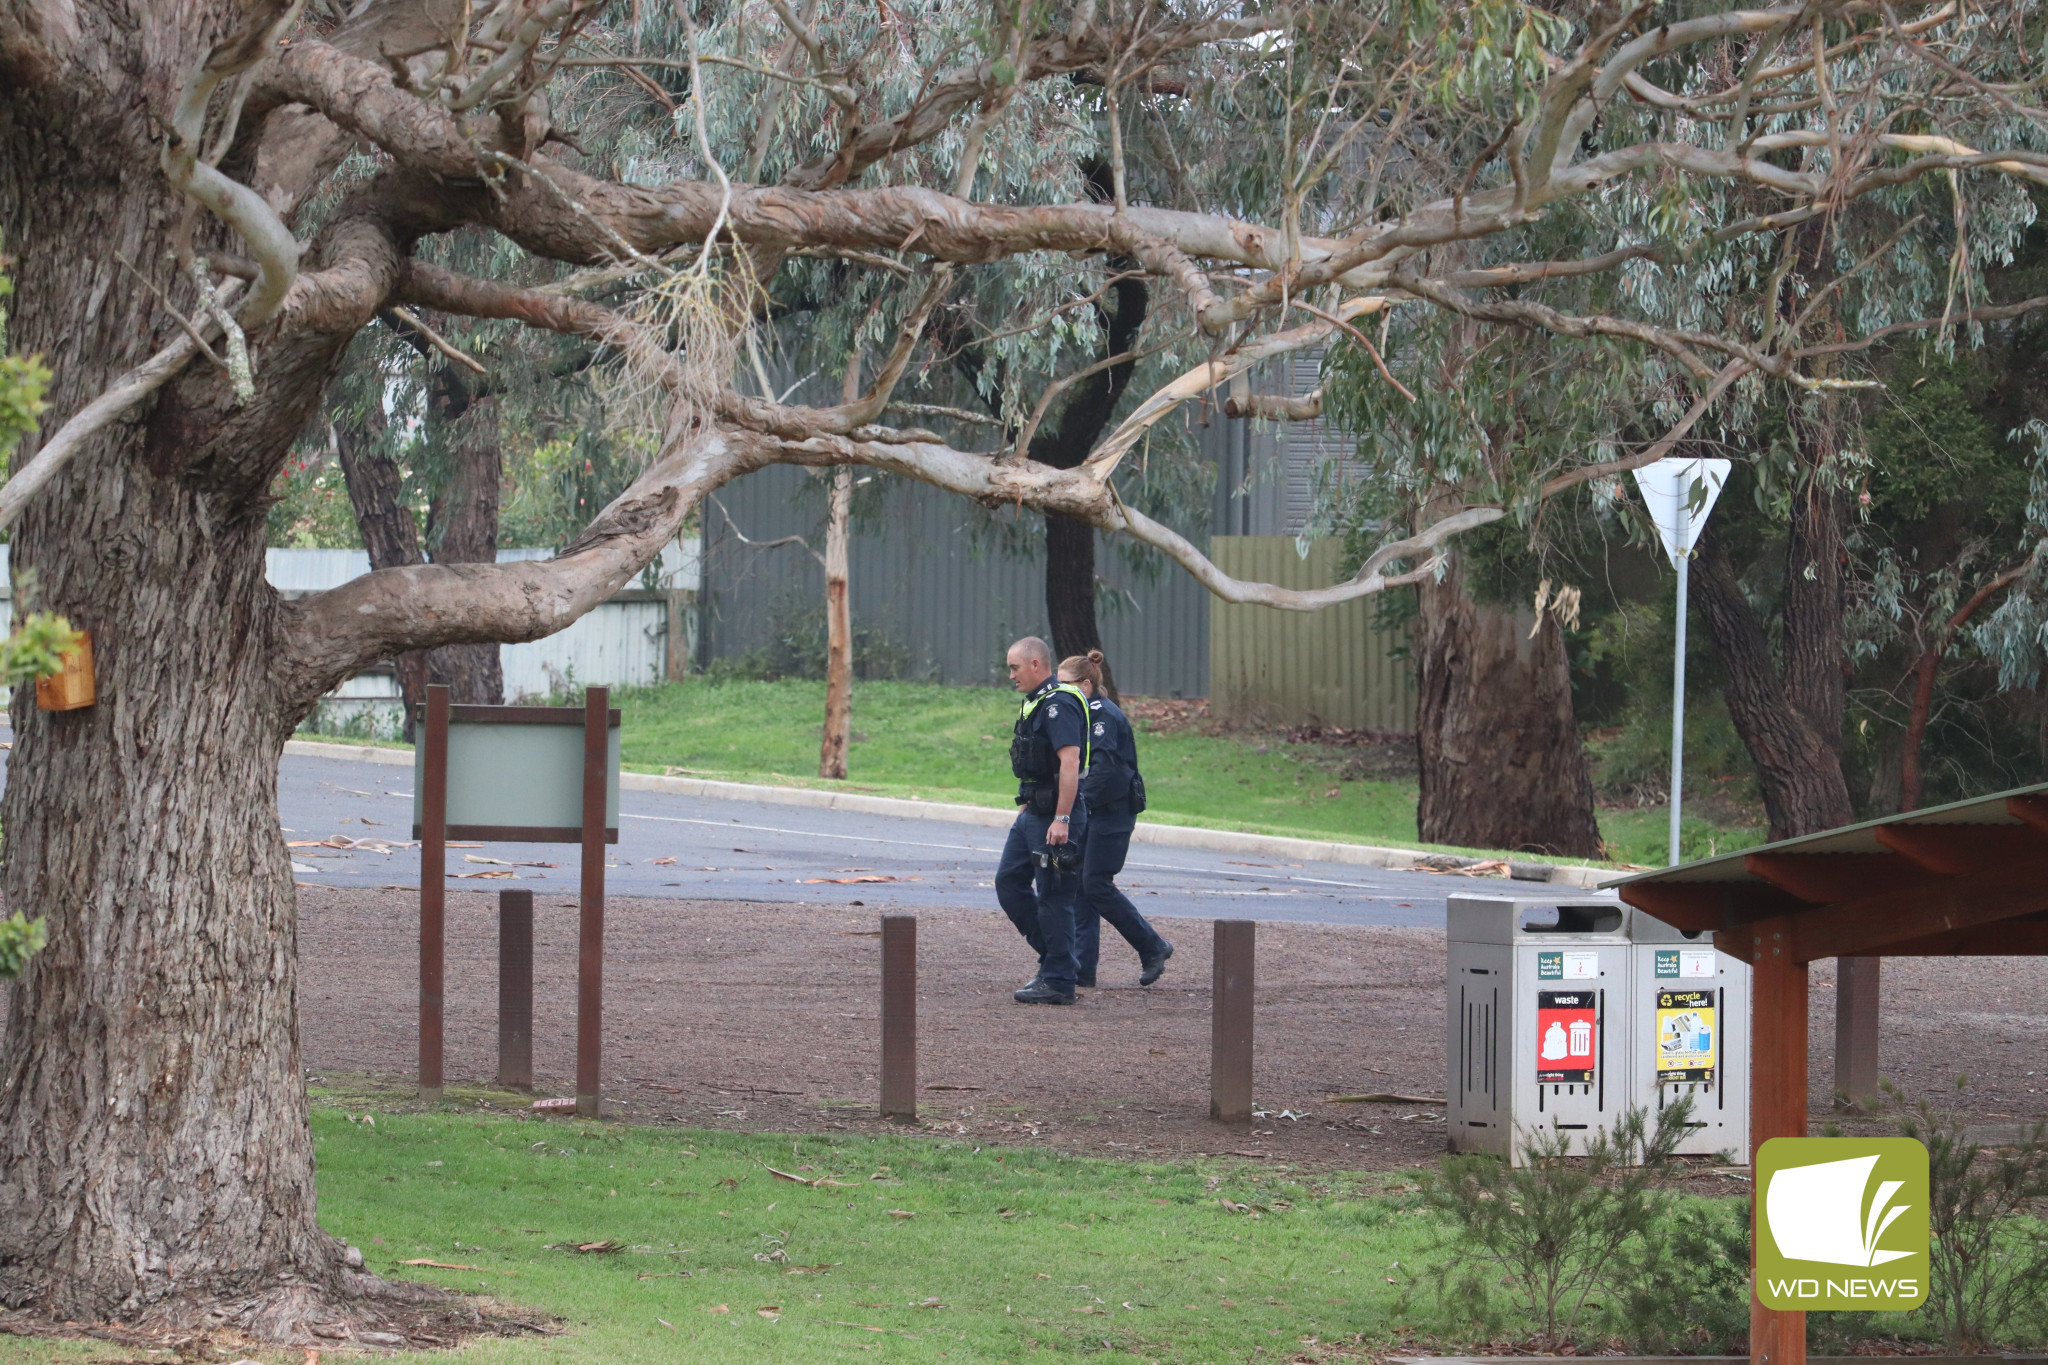 Police attended the Lake Cobden area last Wednesday following reports of an alleged shooting in the early hours of the morning.